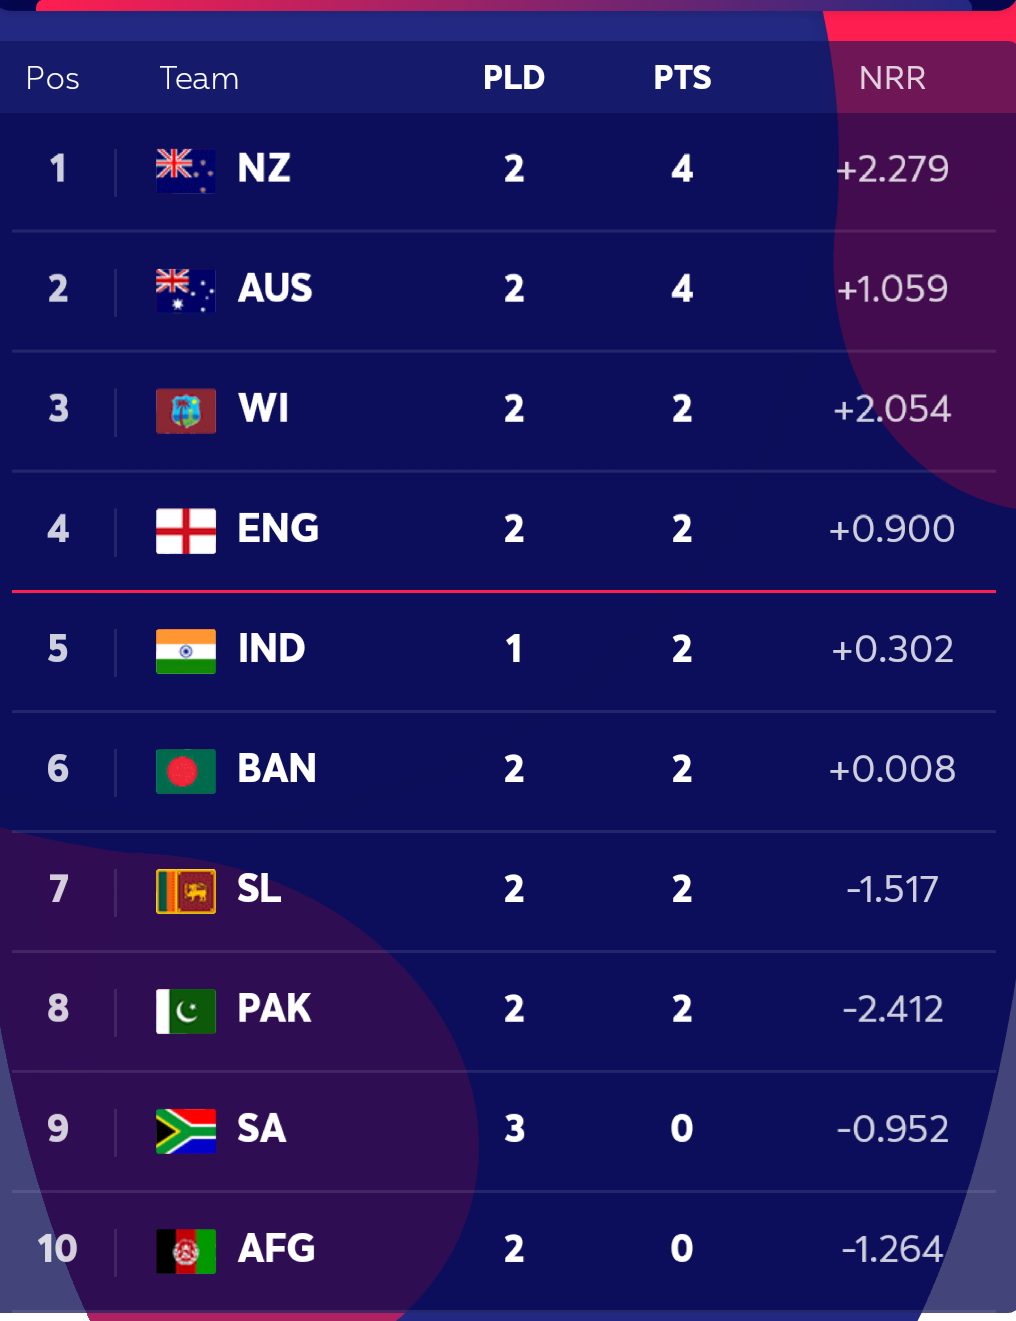 T20 world cup 2021 points table: Cricket World Cup Point Table - IND v AUS 2020: ICC Cricket World Cup